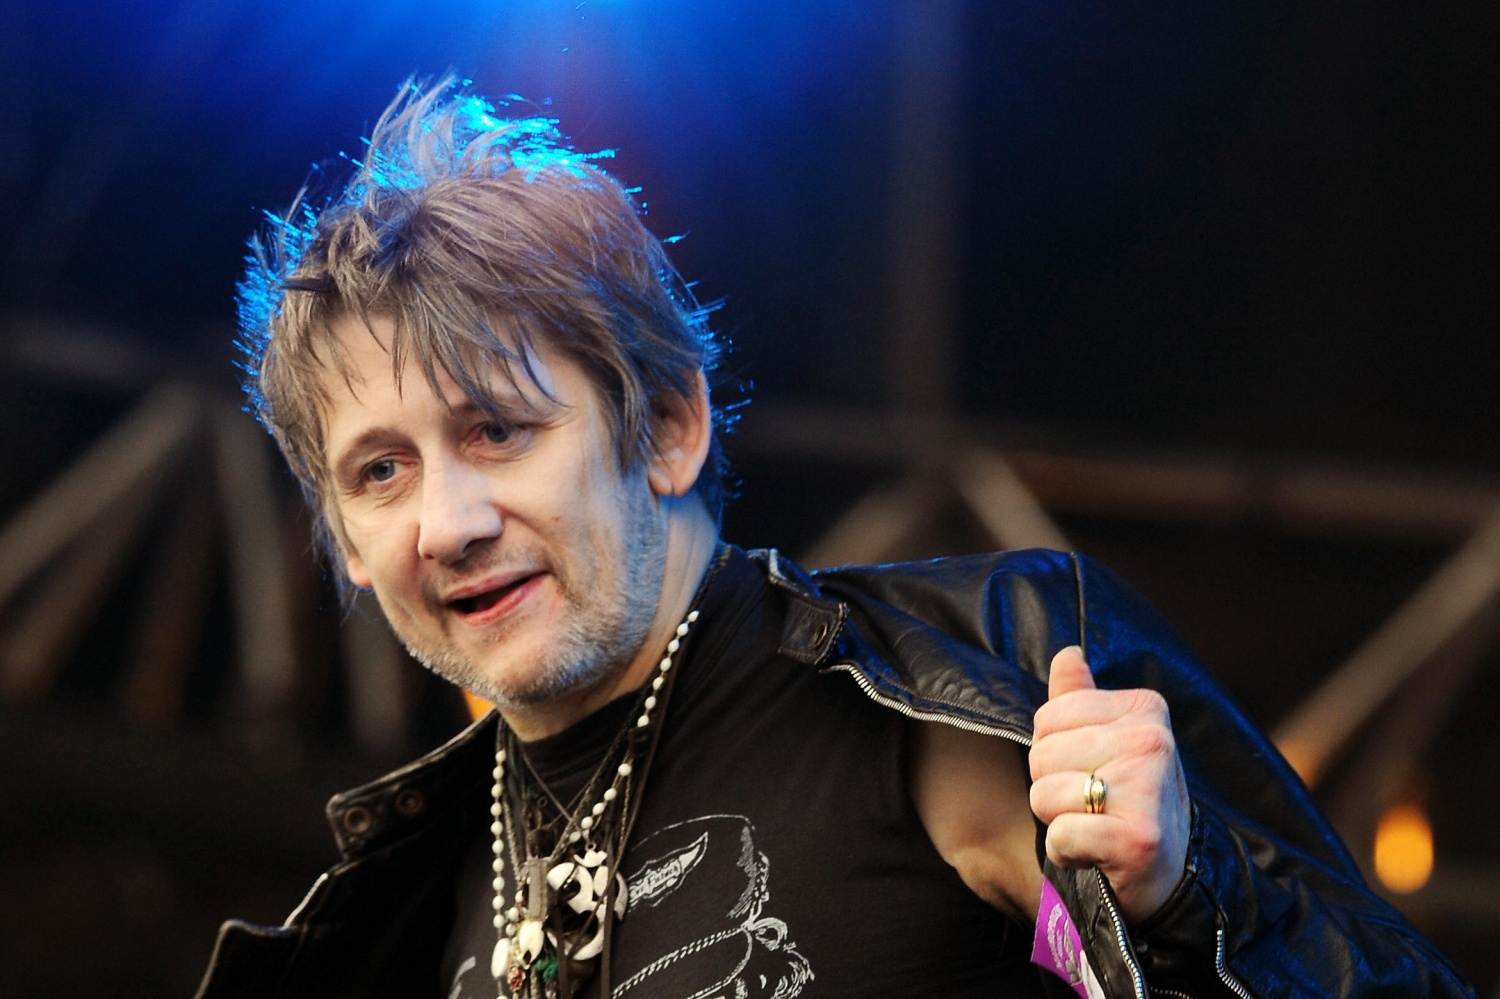 Shane MacGowan's Final Days Revisited by His Wife Following His Death